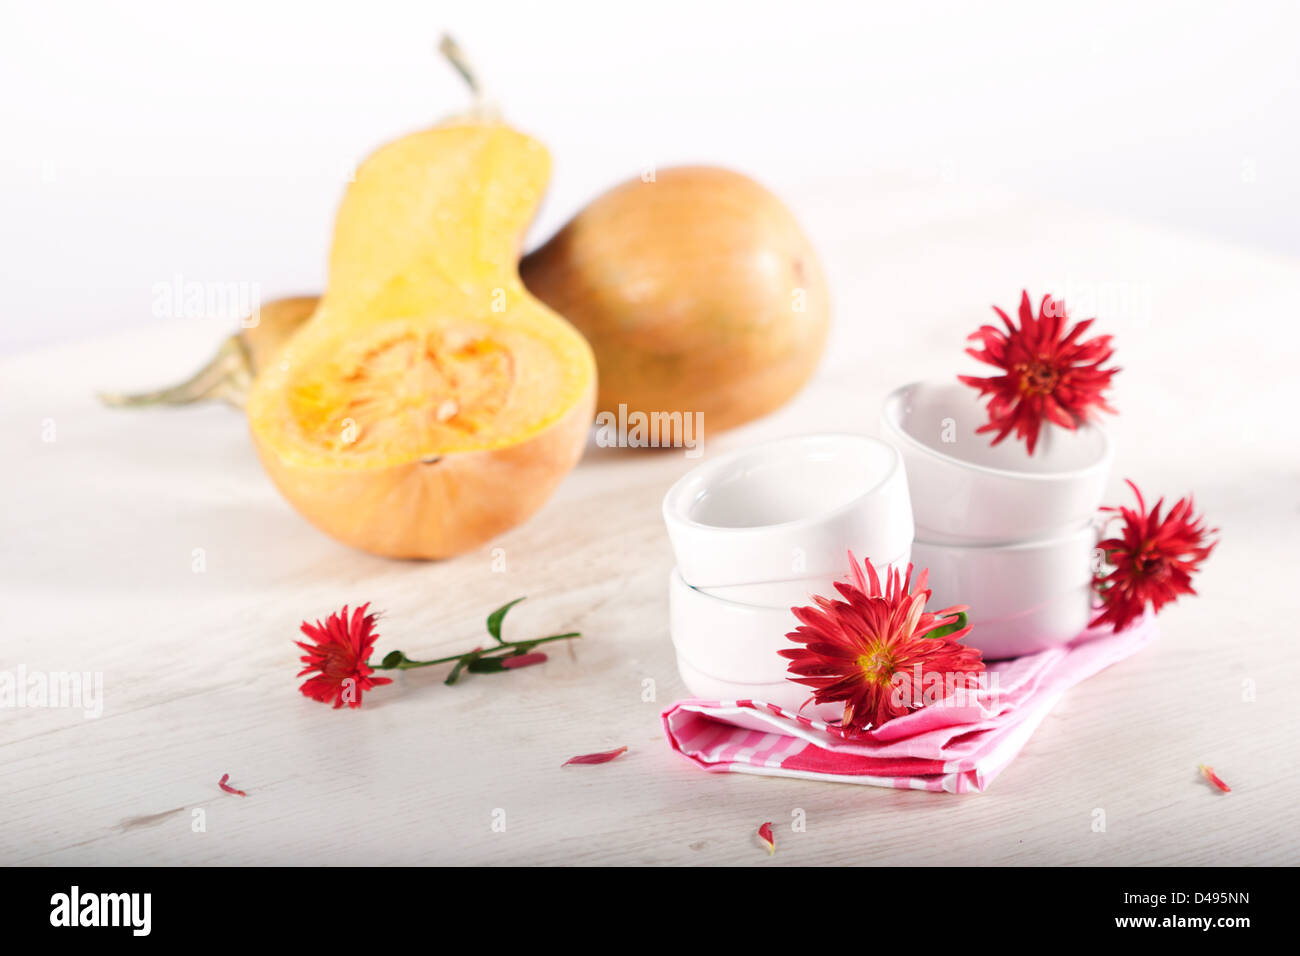 Pumpkins, cooking utensil and autumn flowers. Stock Photo